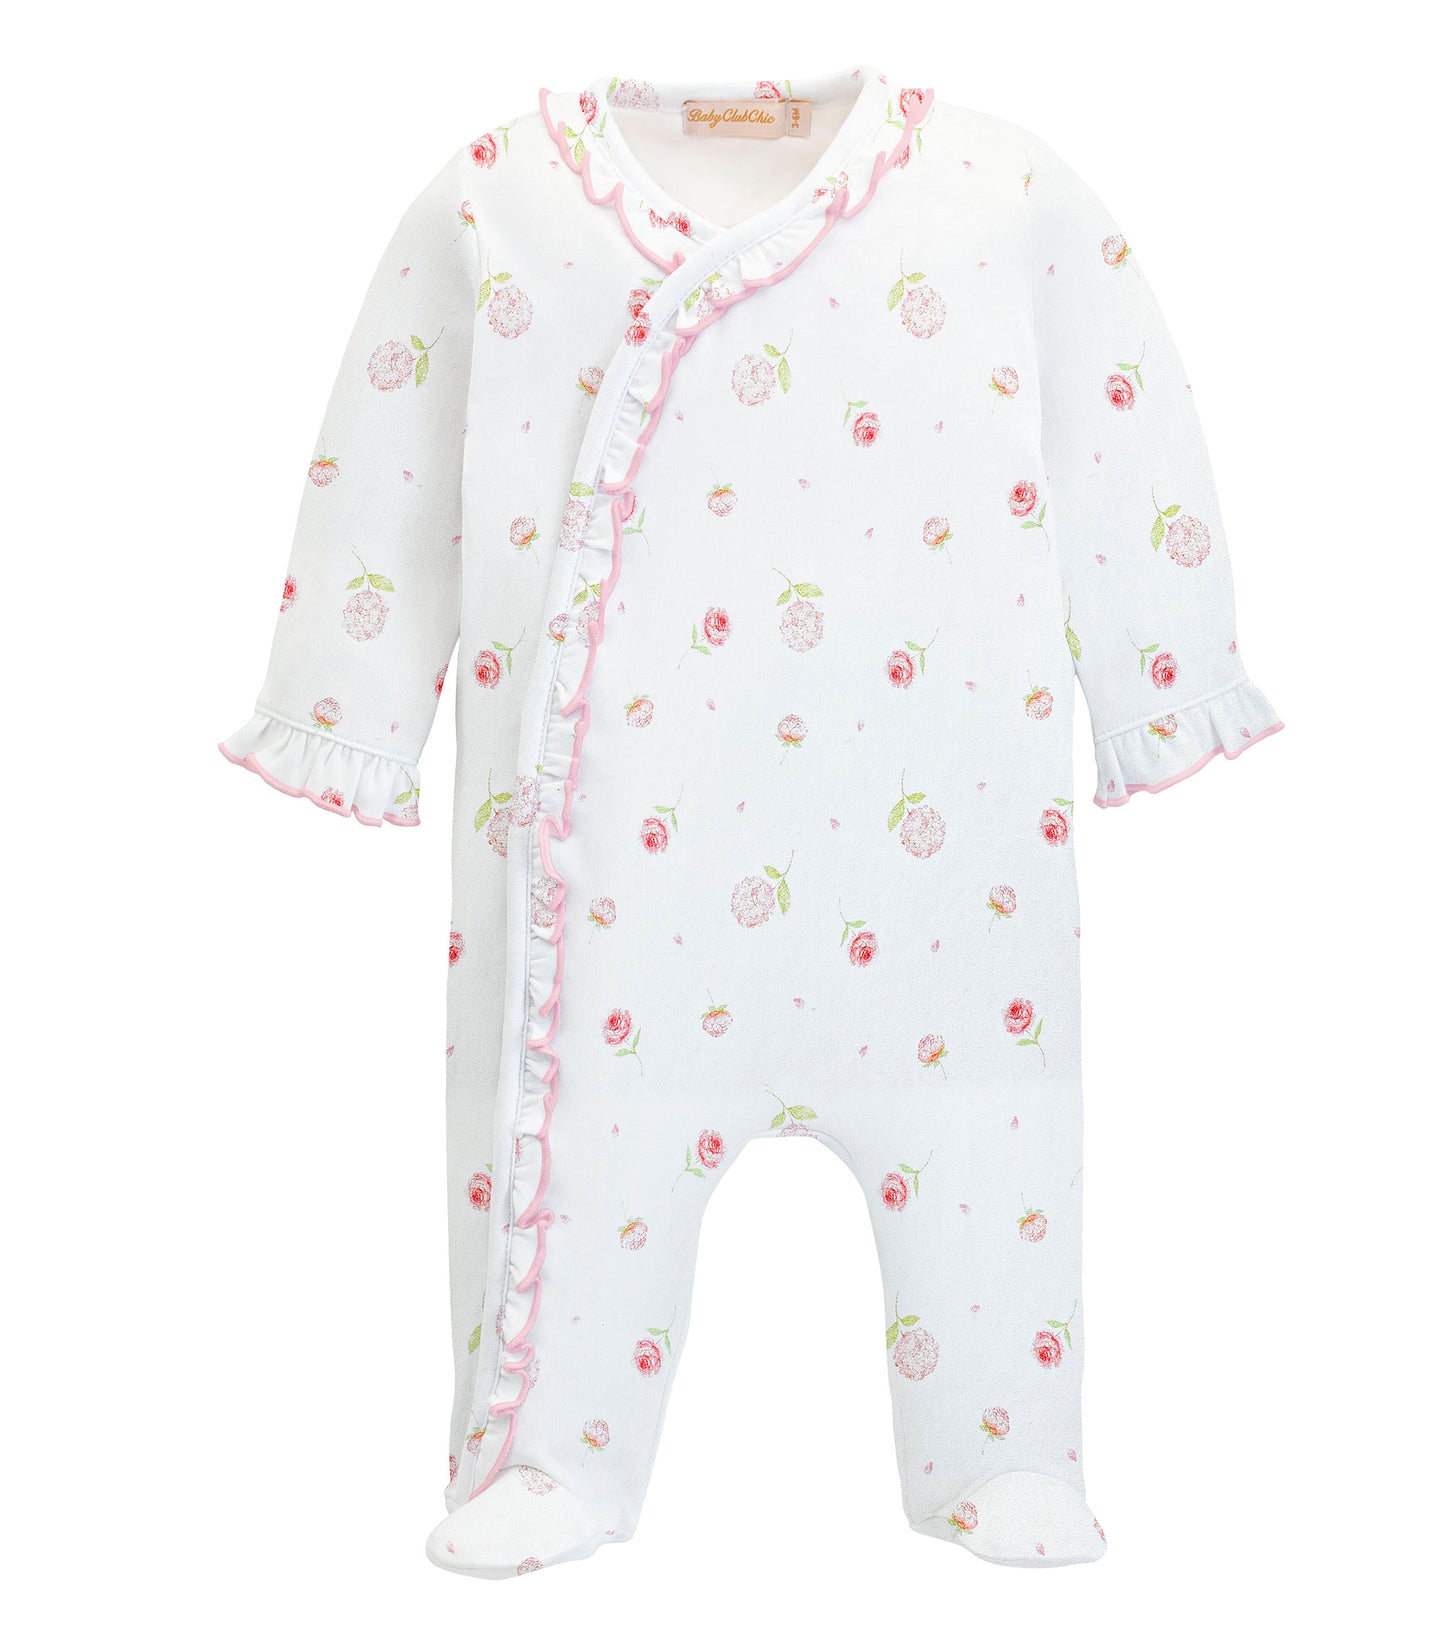 Baby Club Chic Romantic Roses Footie w/Ruffle